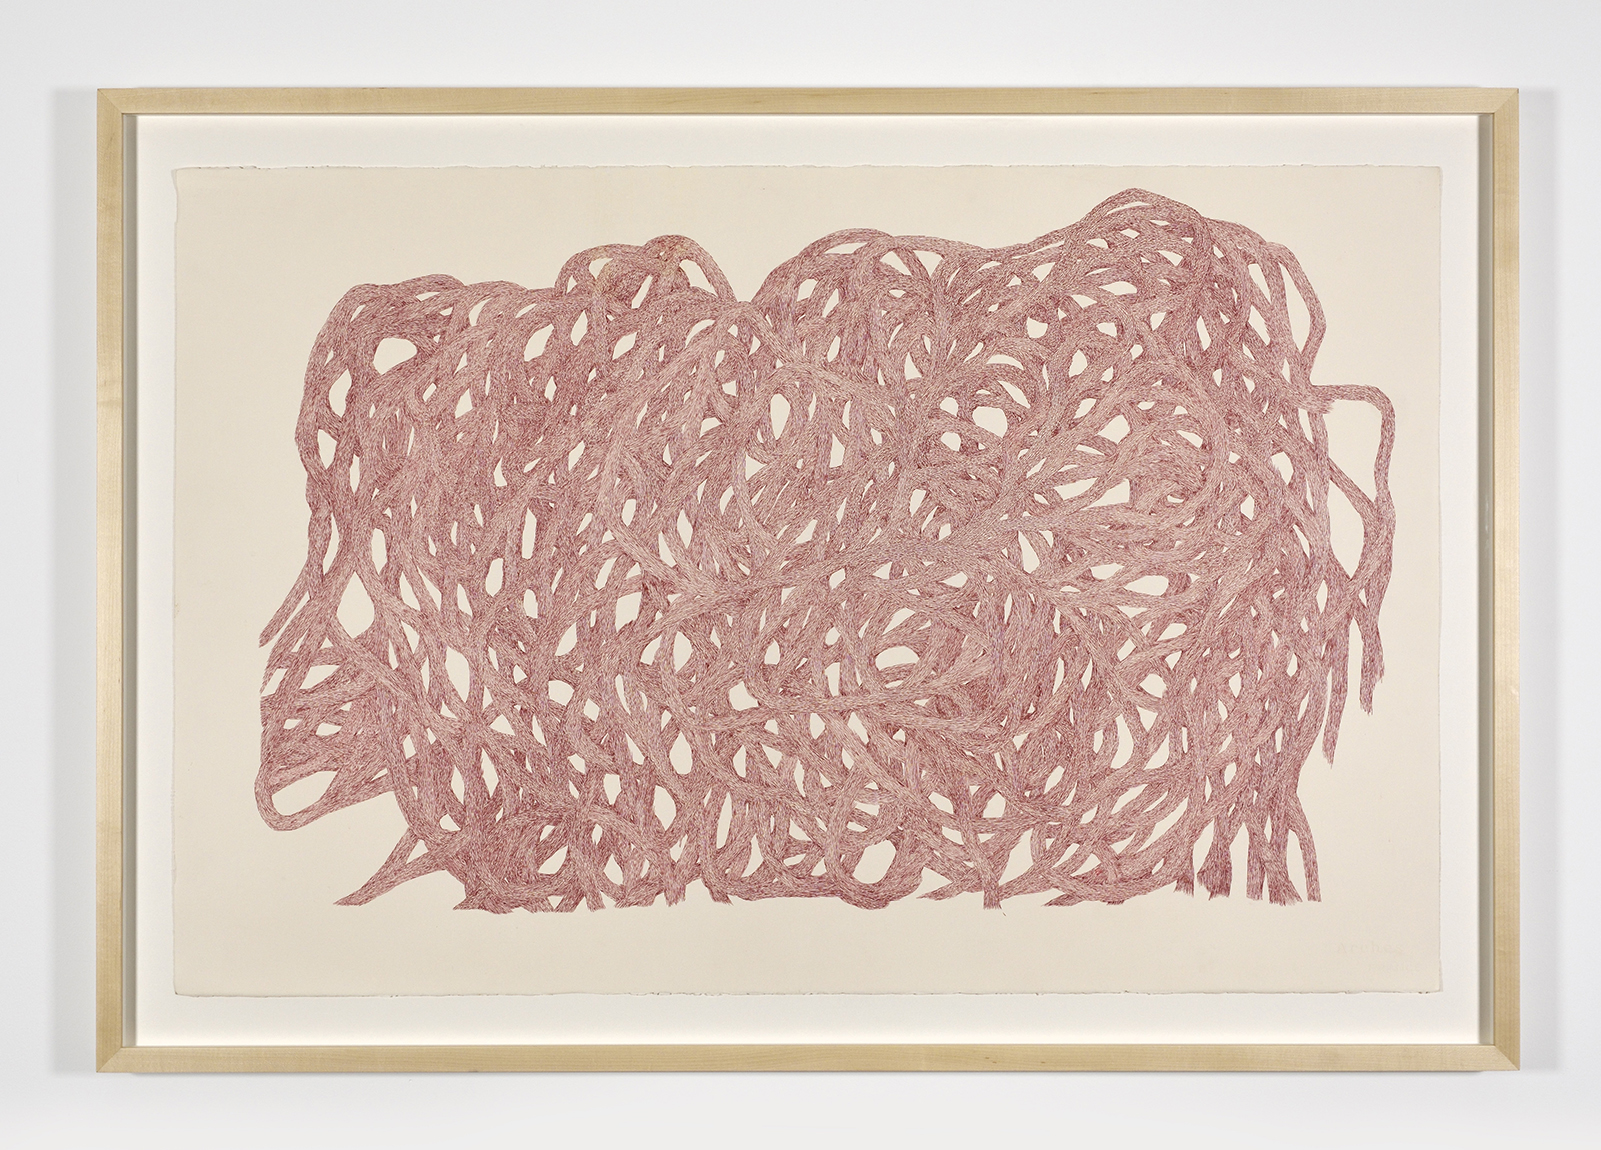 An abstract red drawing of rope-like shapes on canvas